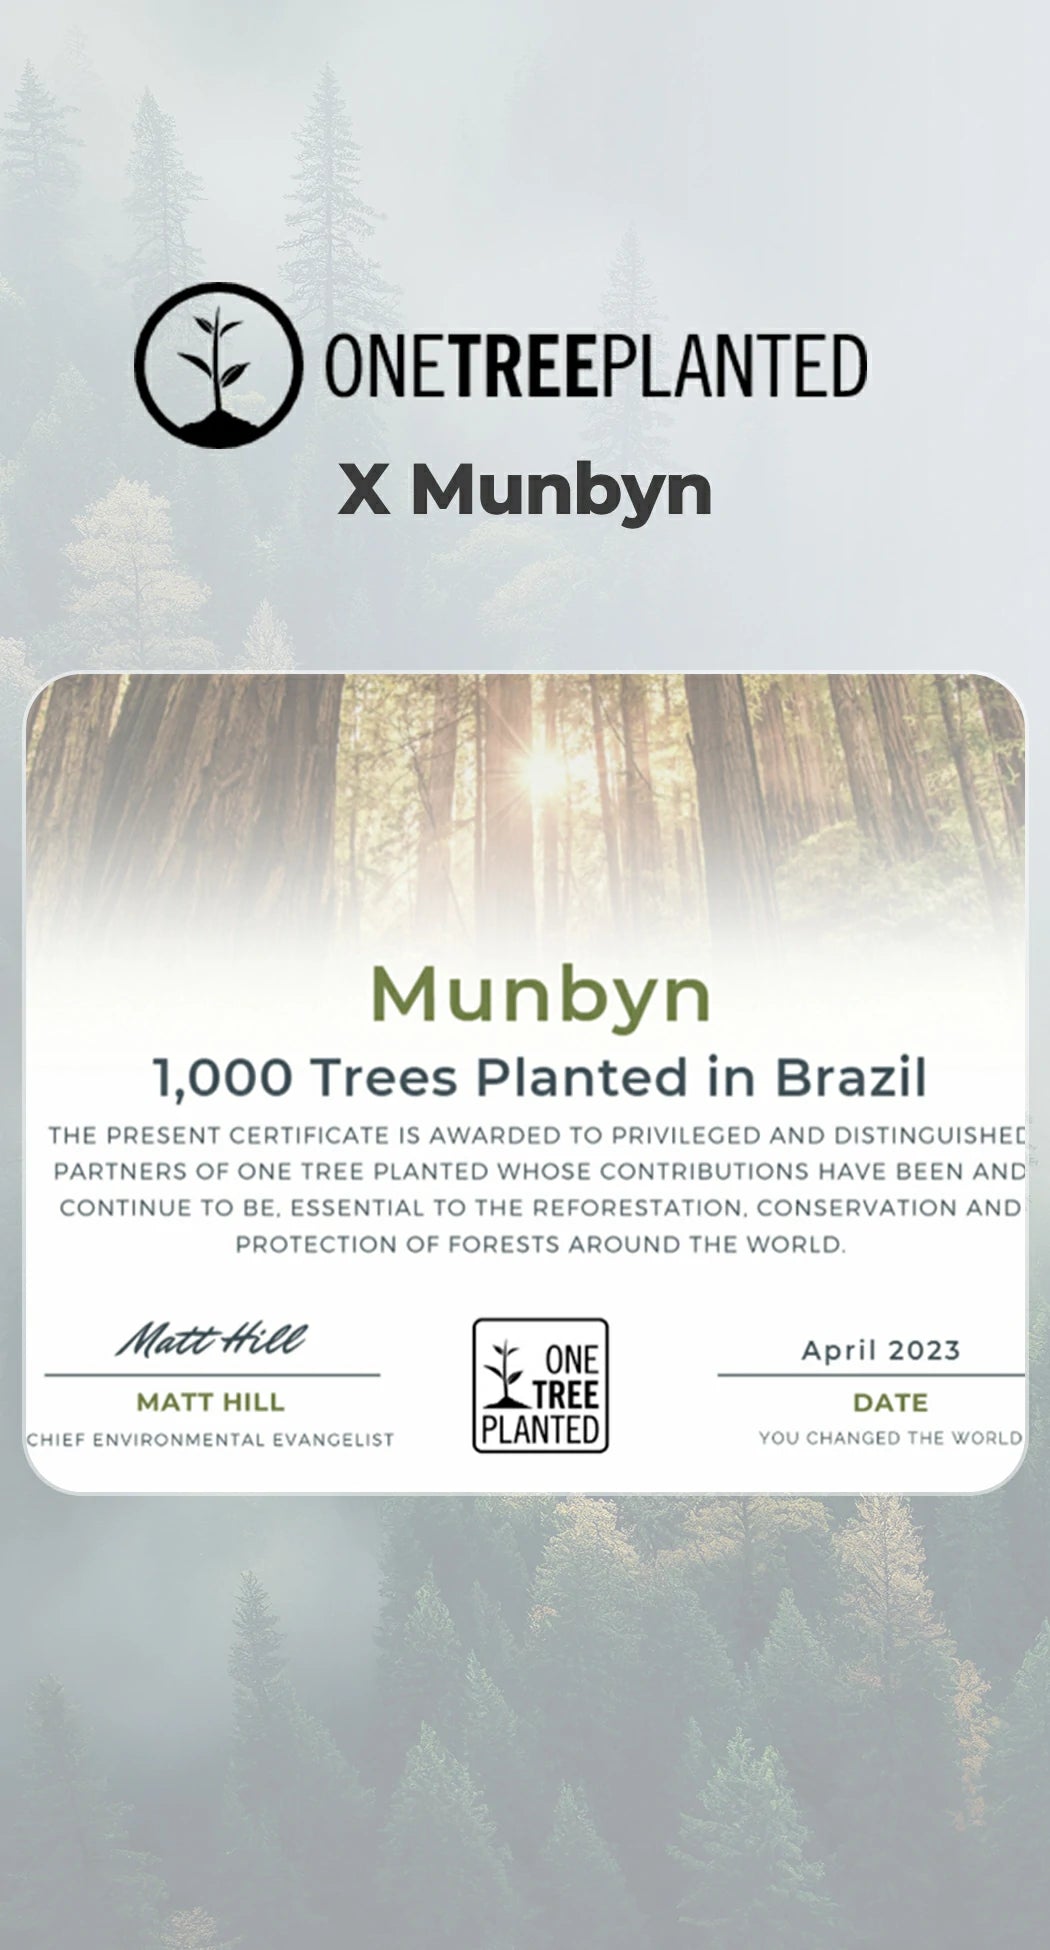 MUNBYN is committed to contributing to the environment. 